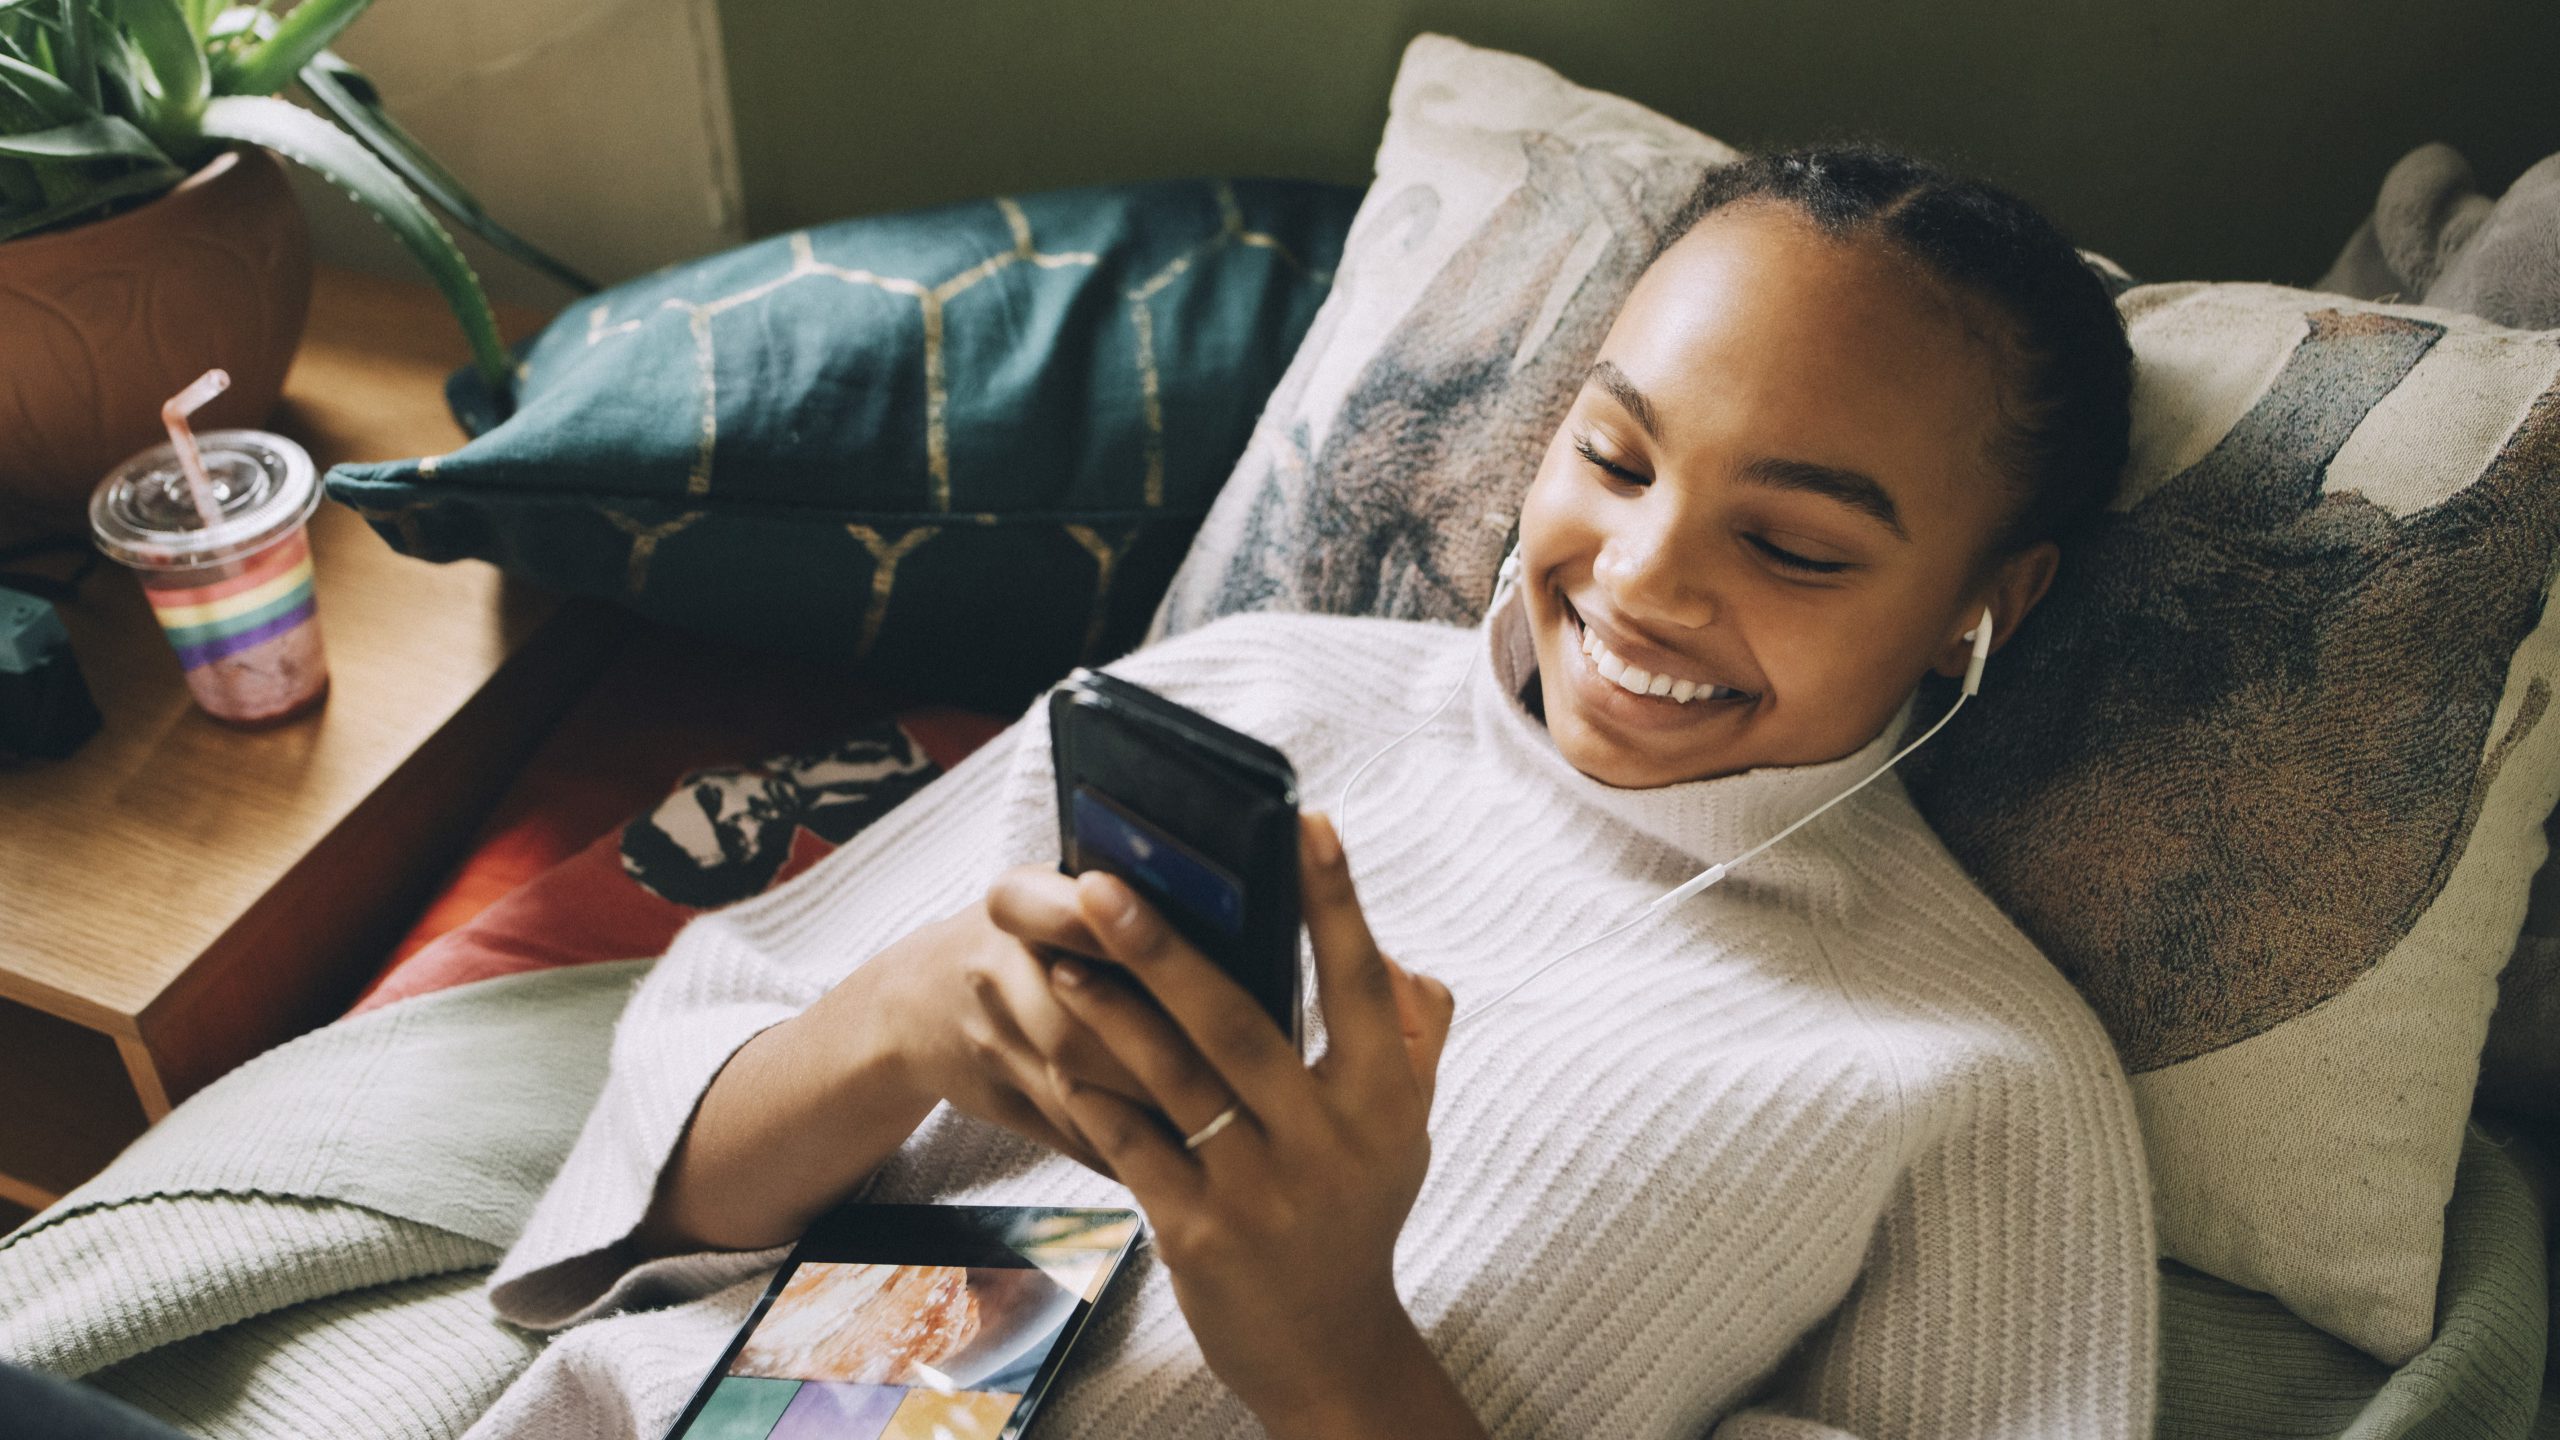 An image of a smiling teen looking at a phone in bed.